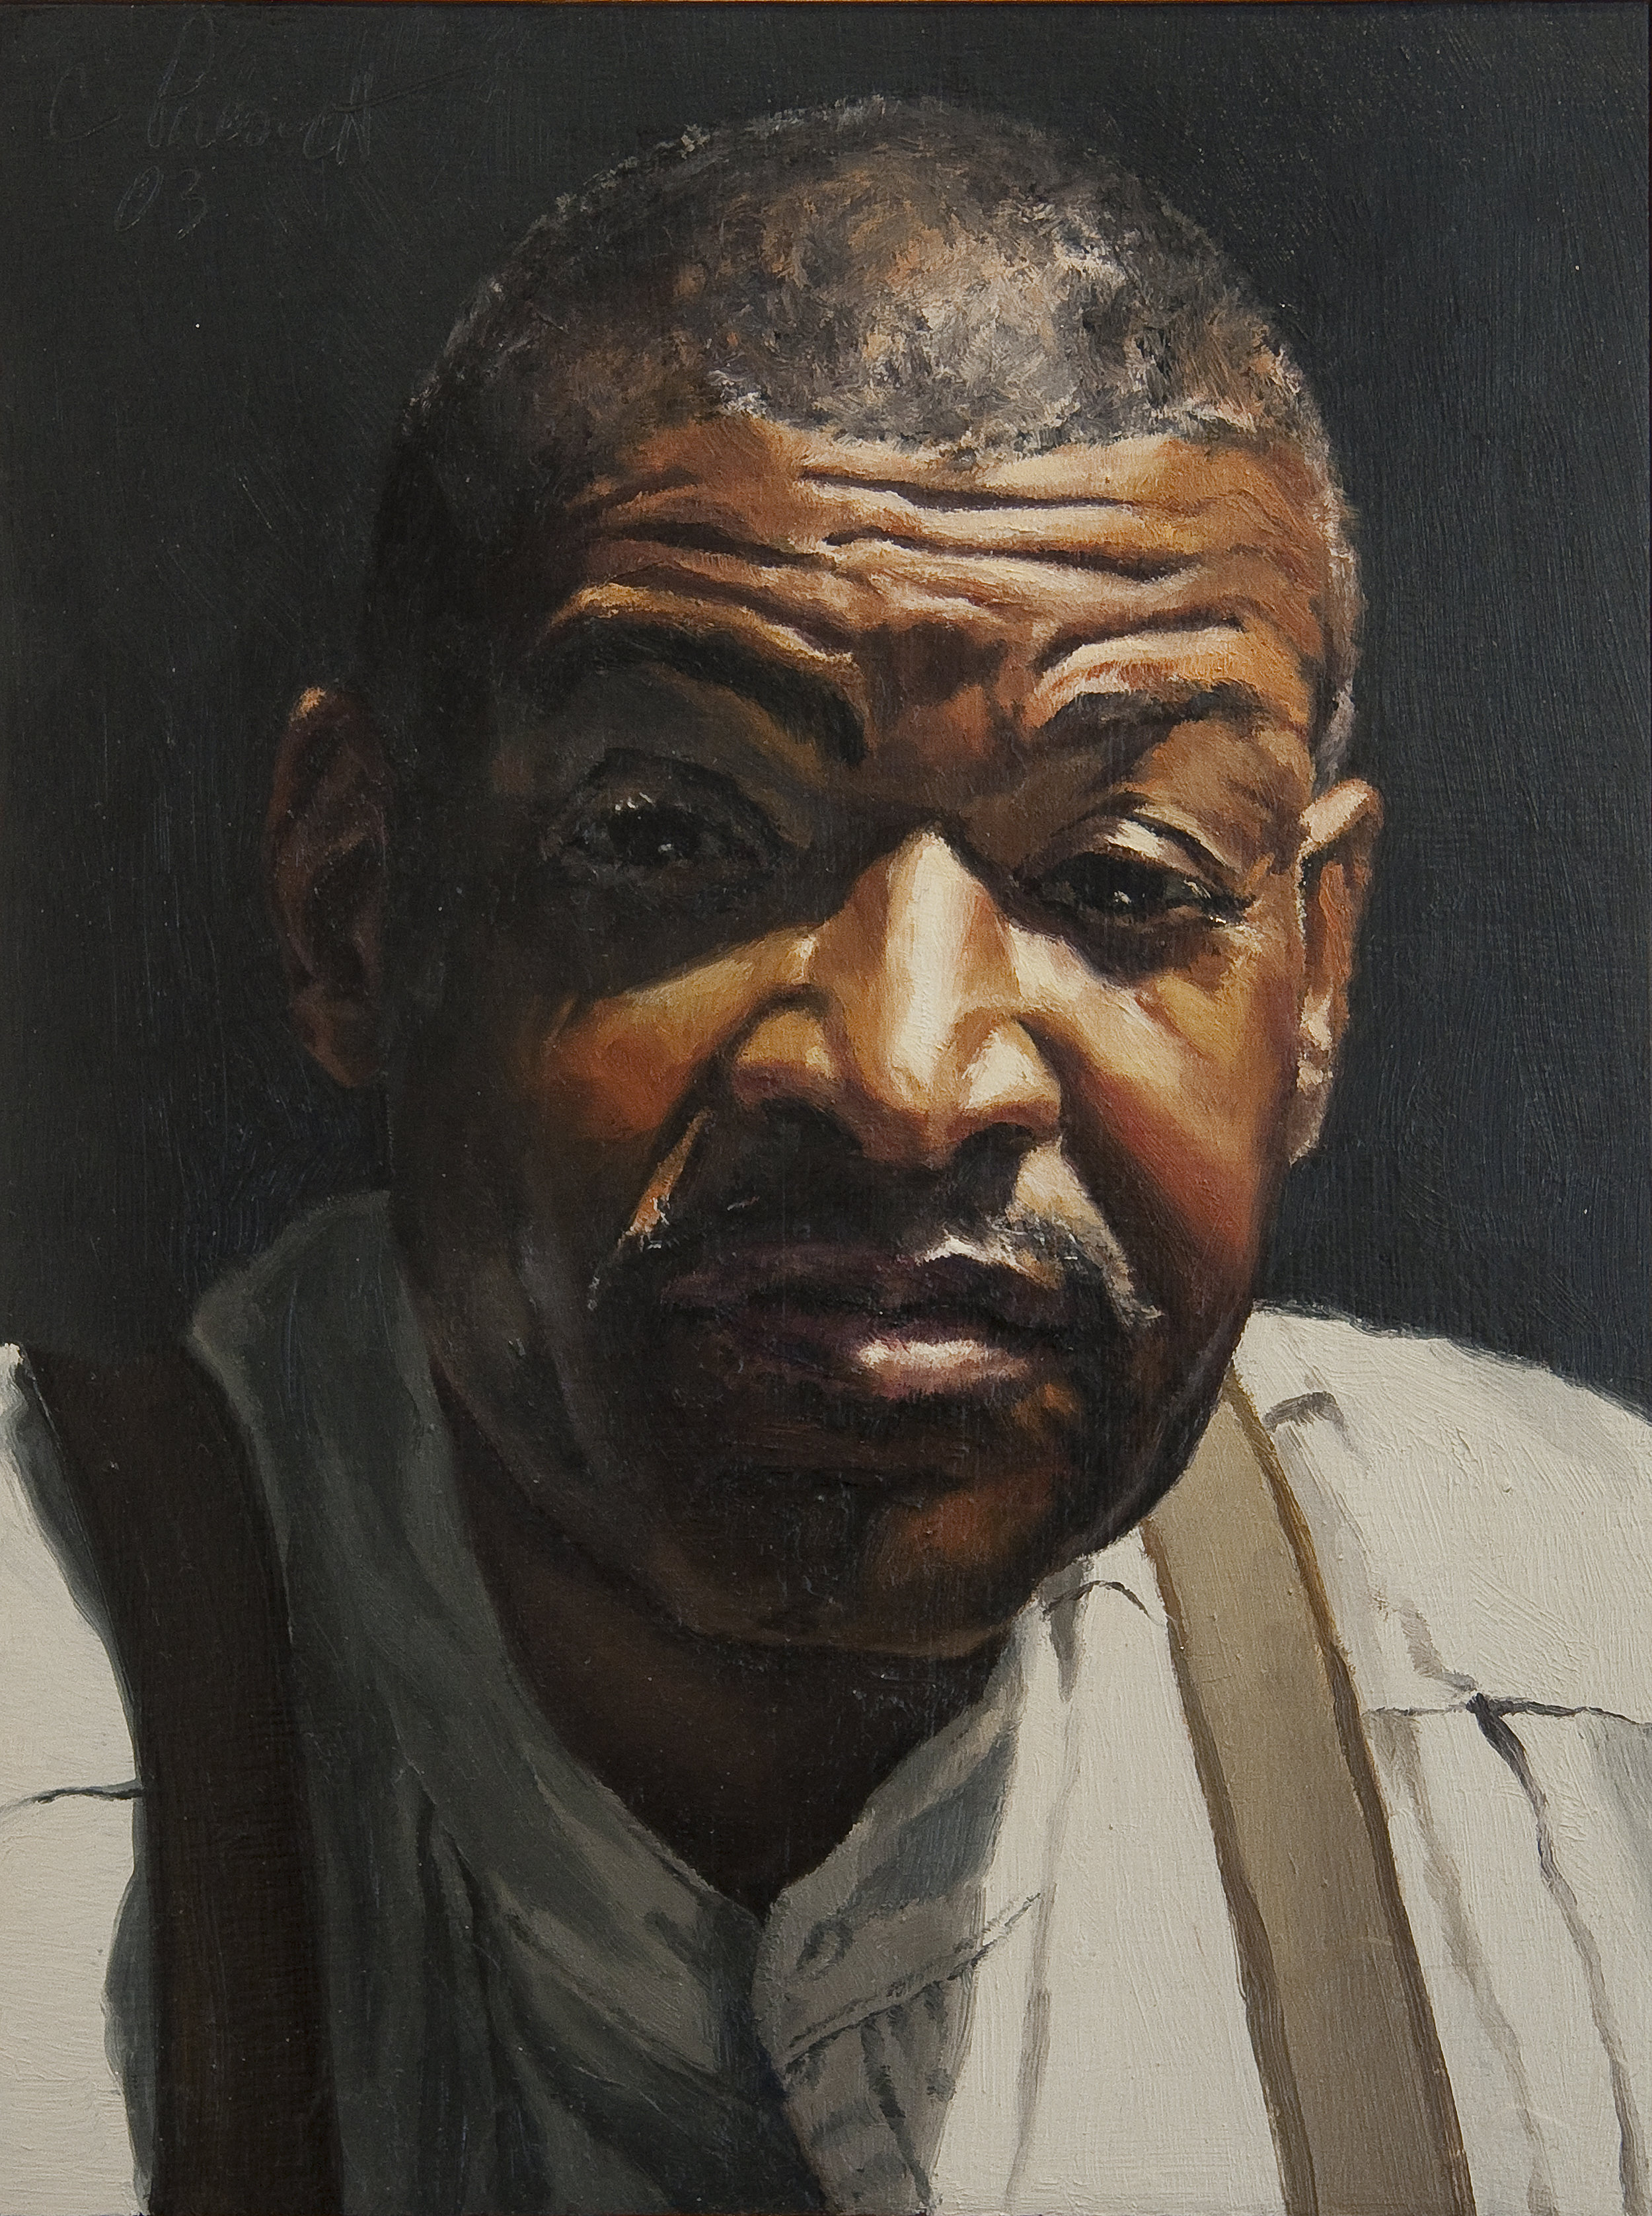   Under the Scrutiny of Barry Davis , Oil on Wood Panel, 2003, 12" x 9", Private Collection 